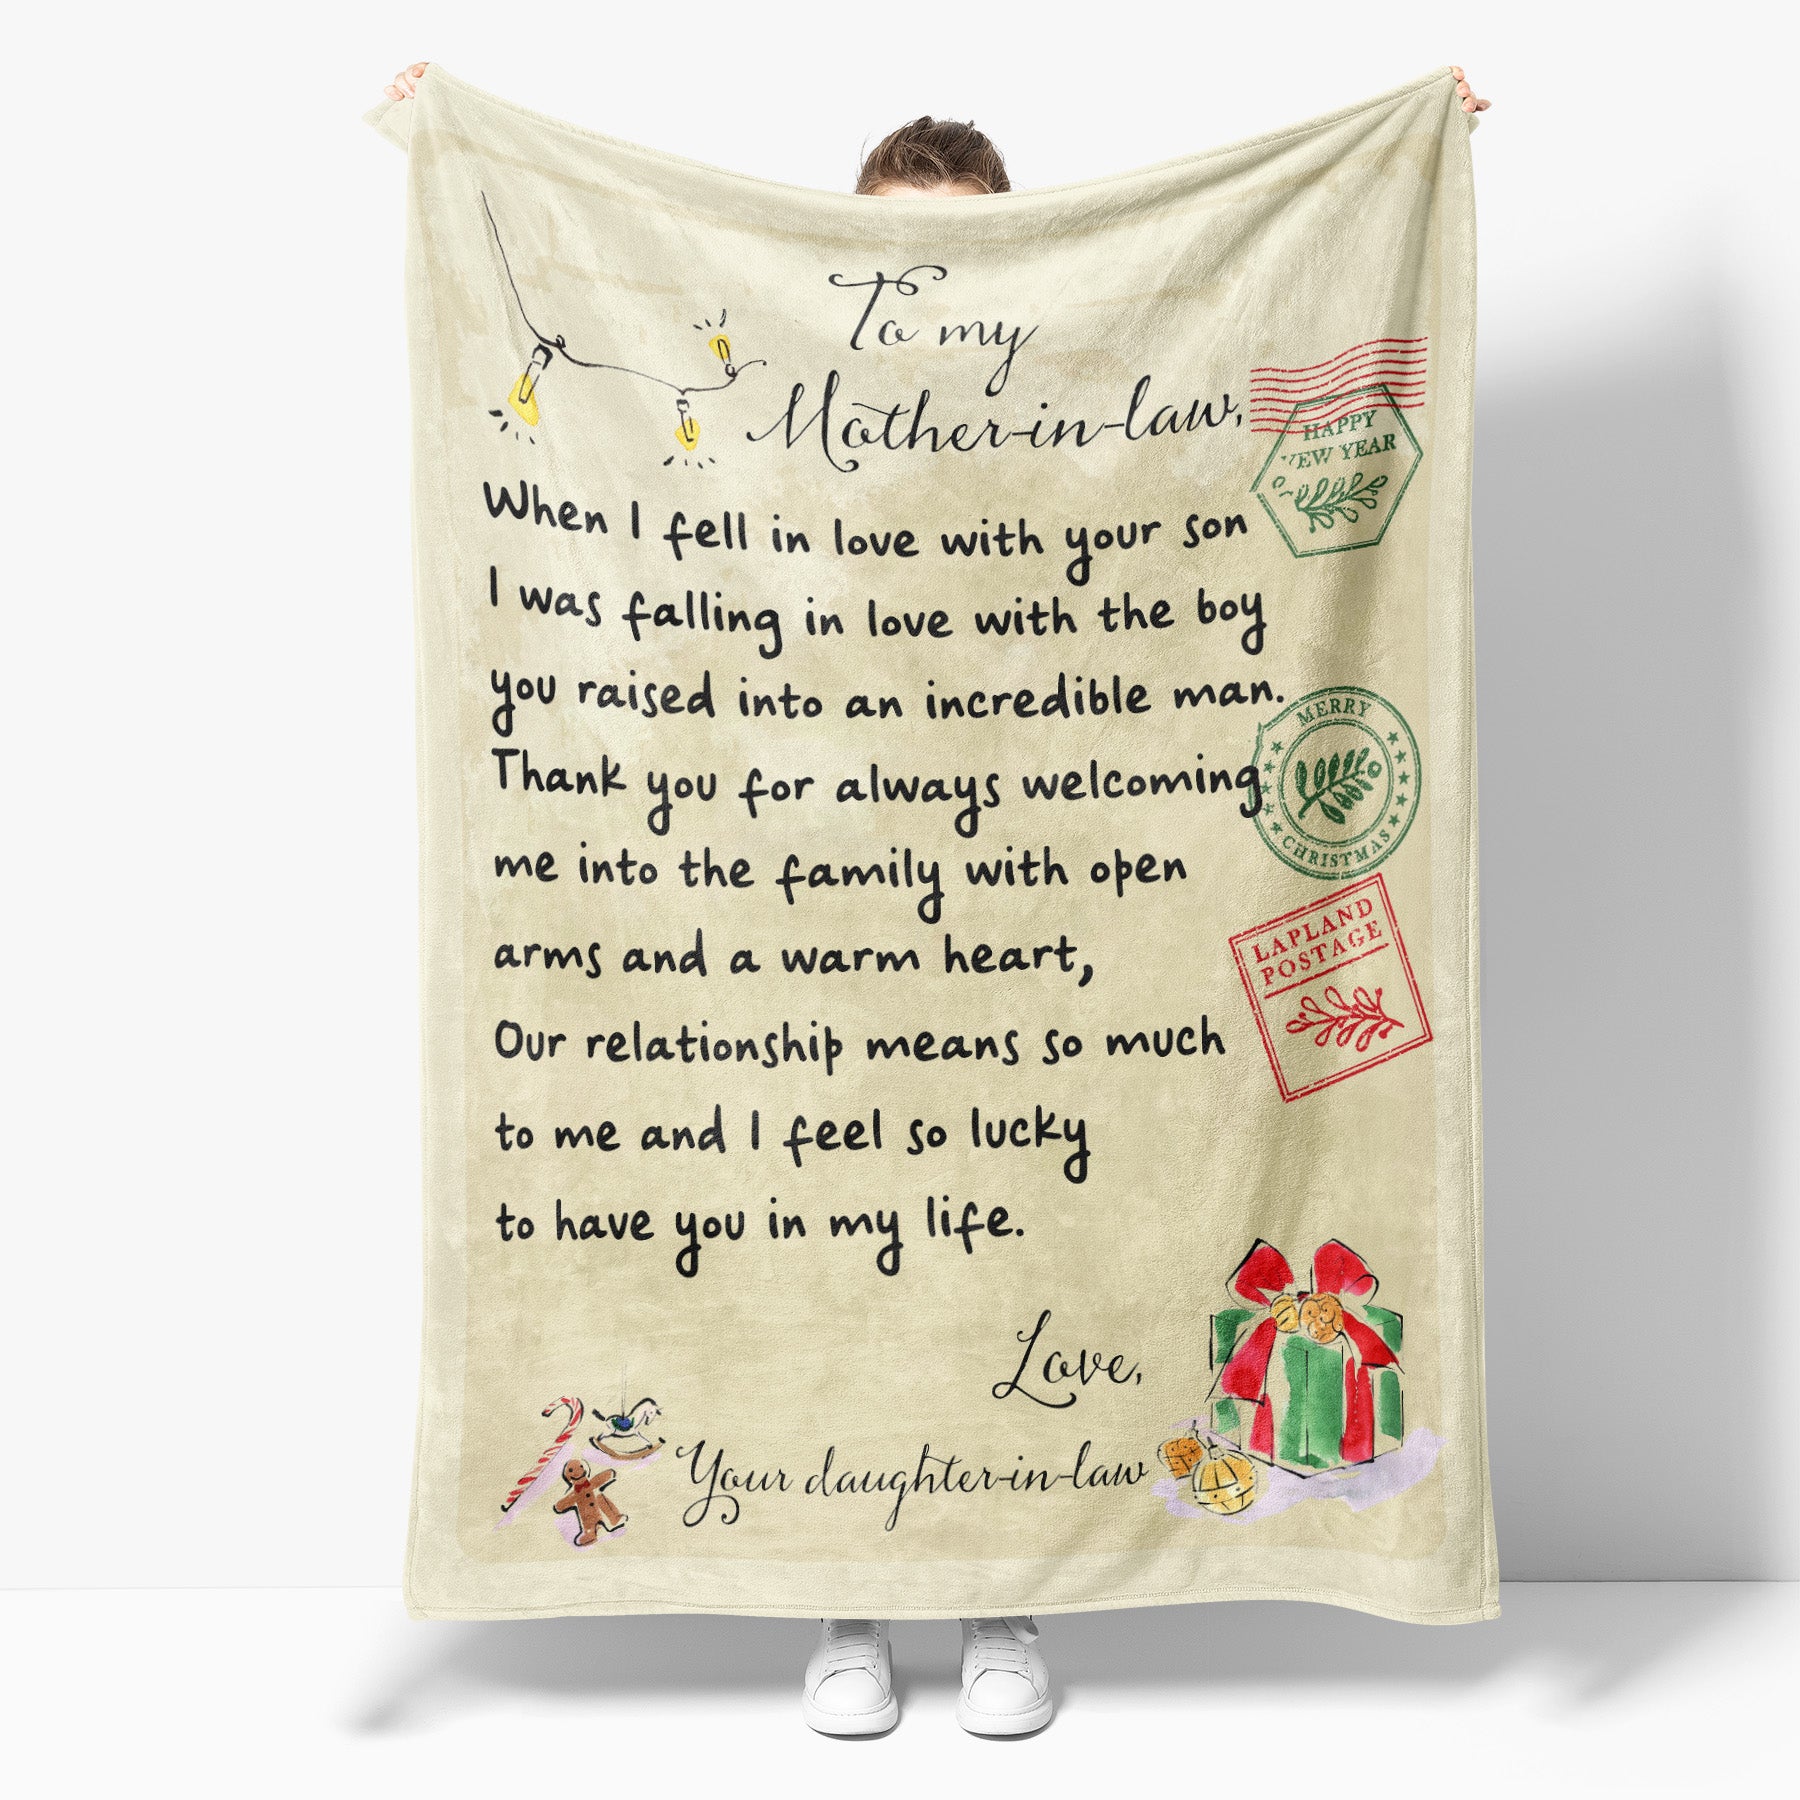 Christmas Blanket Gift Ideas for Mother in Law Thank you For Always Welcoming me into The Family 201127 - Fleece